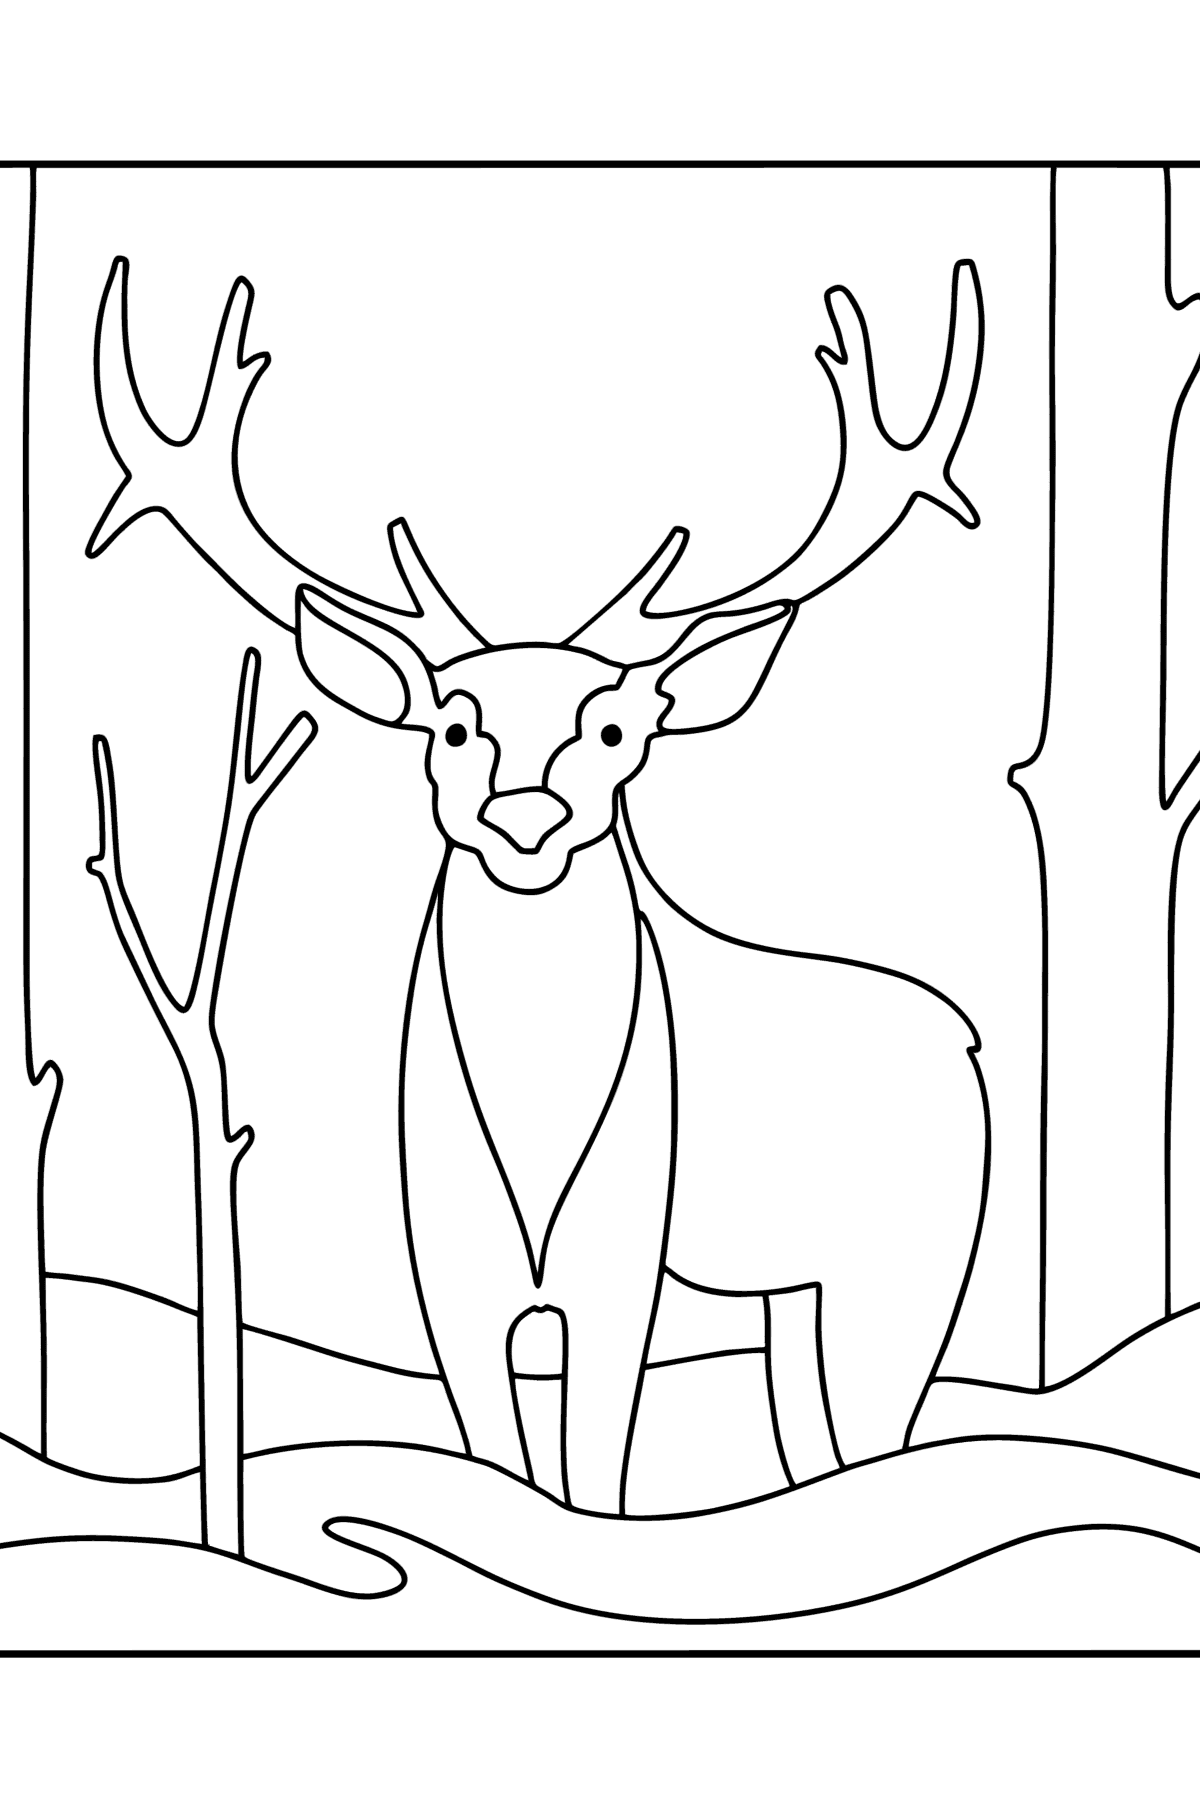 Deer in the winter forest сoloring page - Coloring Pages for Kids